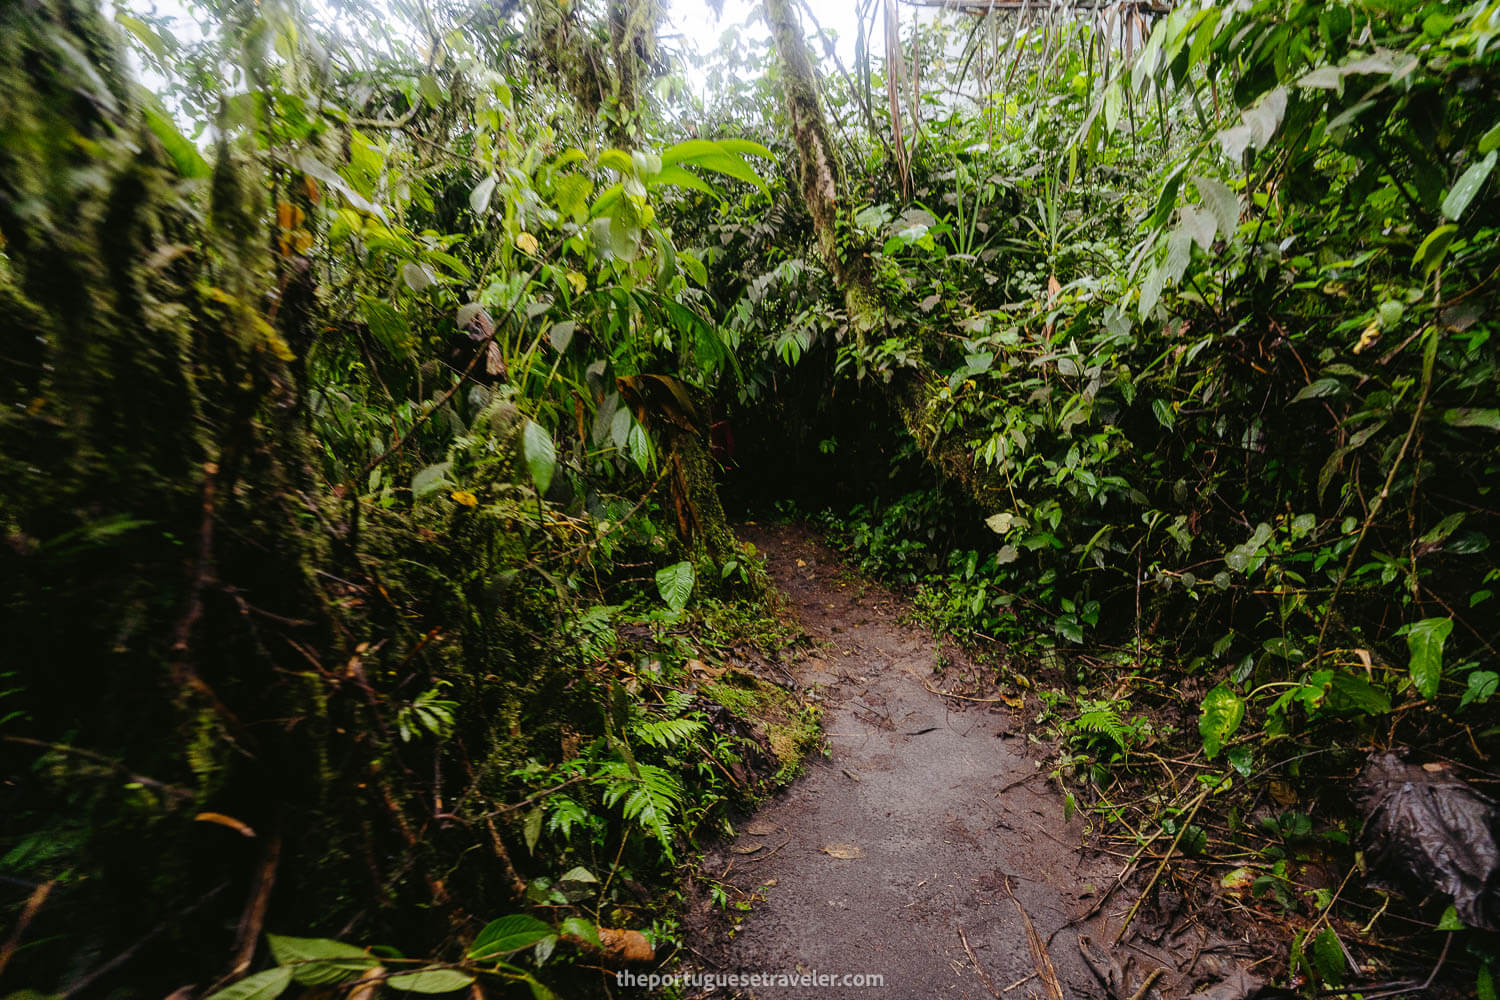 The entrance to the rainforest section of the path